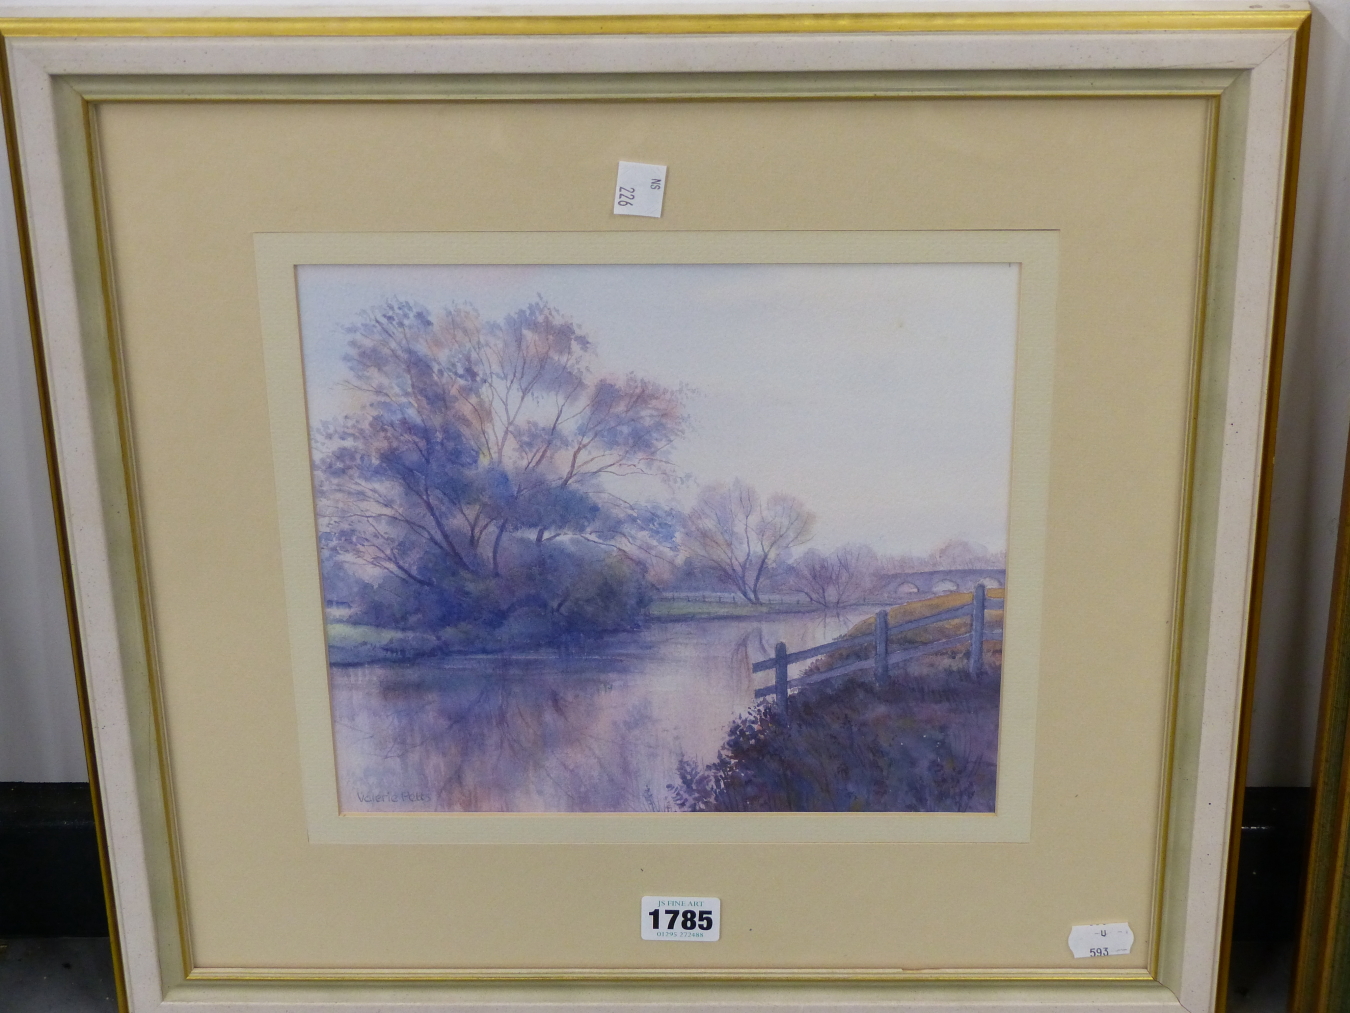 VALERIE PETTS (20TH CENTURY) ARR, THE THAMES AT NEWBRIDGE, OXFORDSHIRE, SIGNED, WATERCOLOUR, 25 X - Image 3 of 5